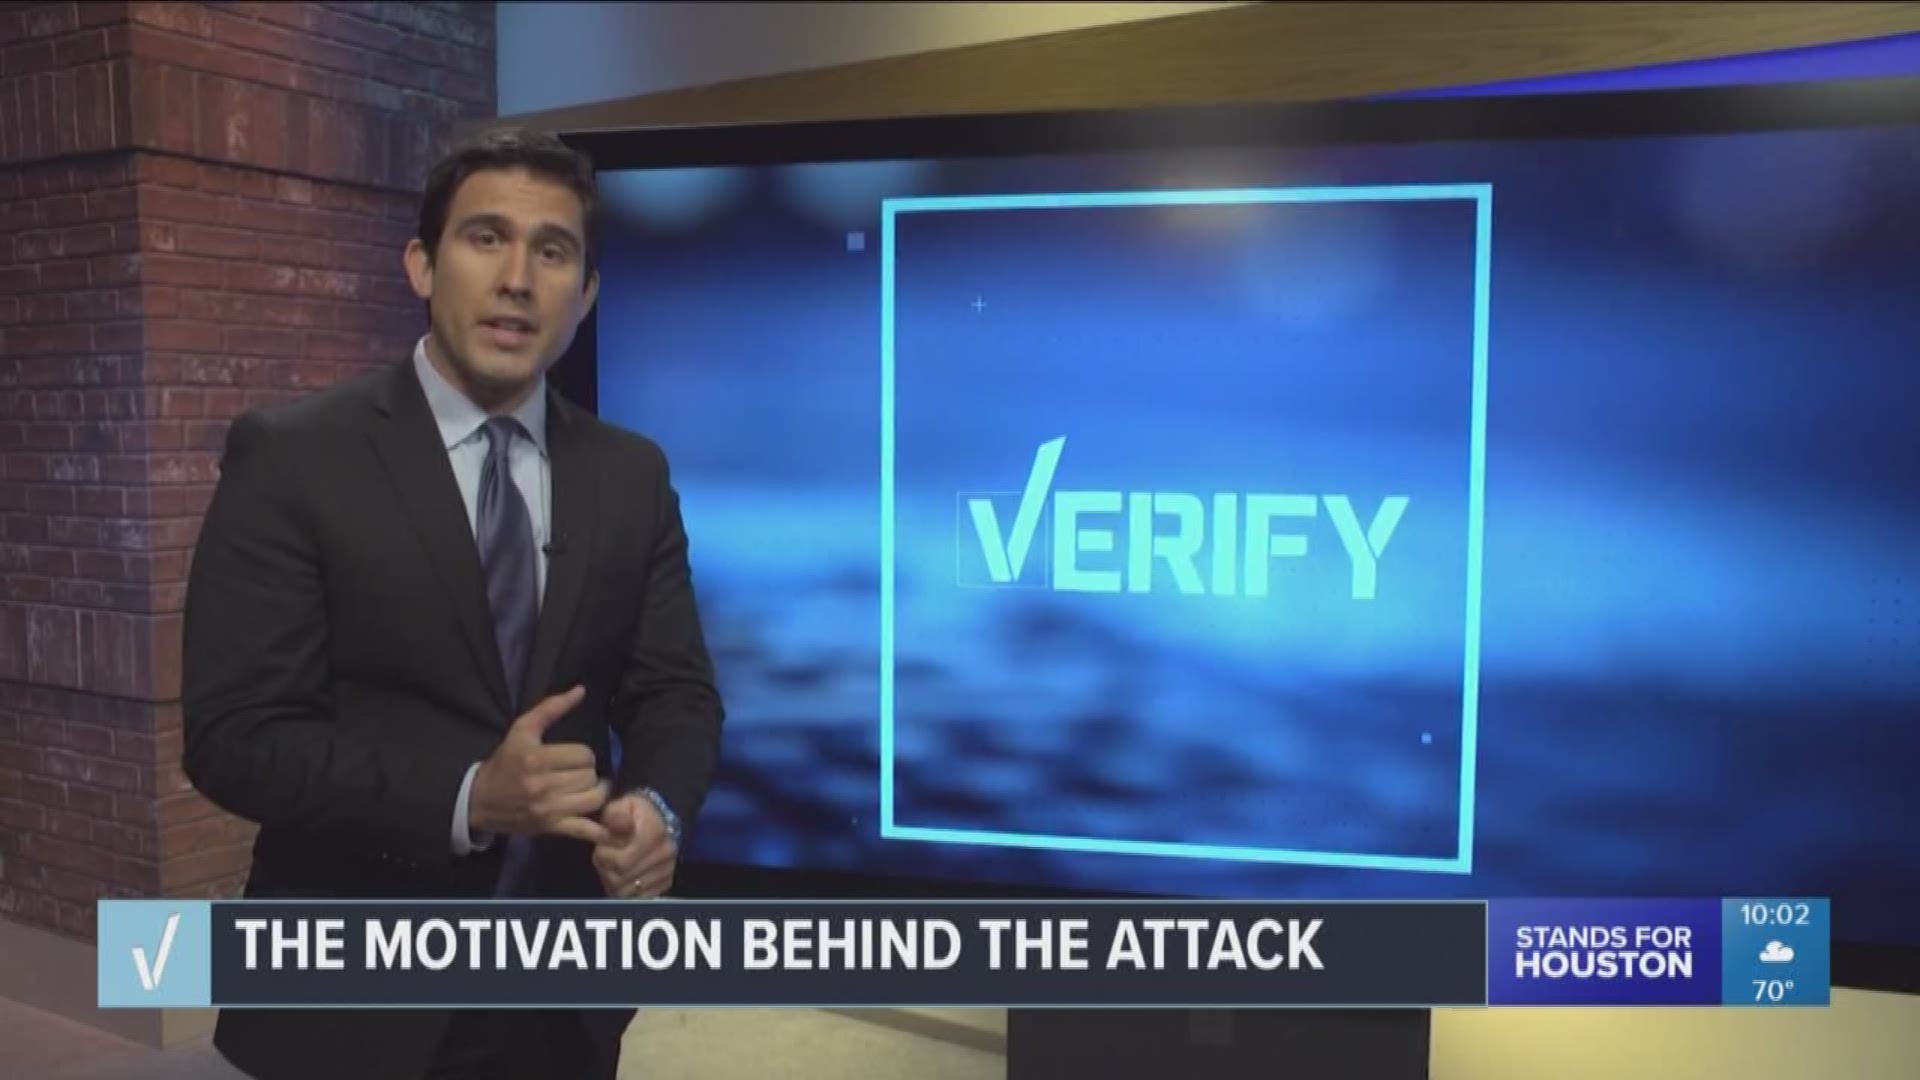 The KHOU 11 Verify team is fact-checking more claims in the aftermath of the Santa Fe school shooting